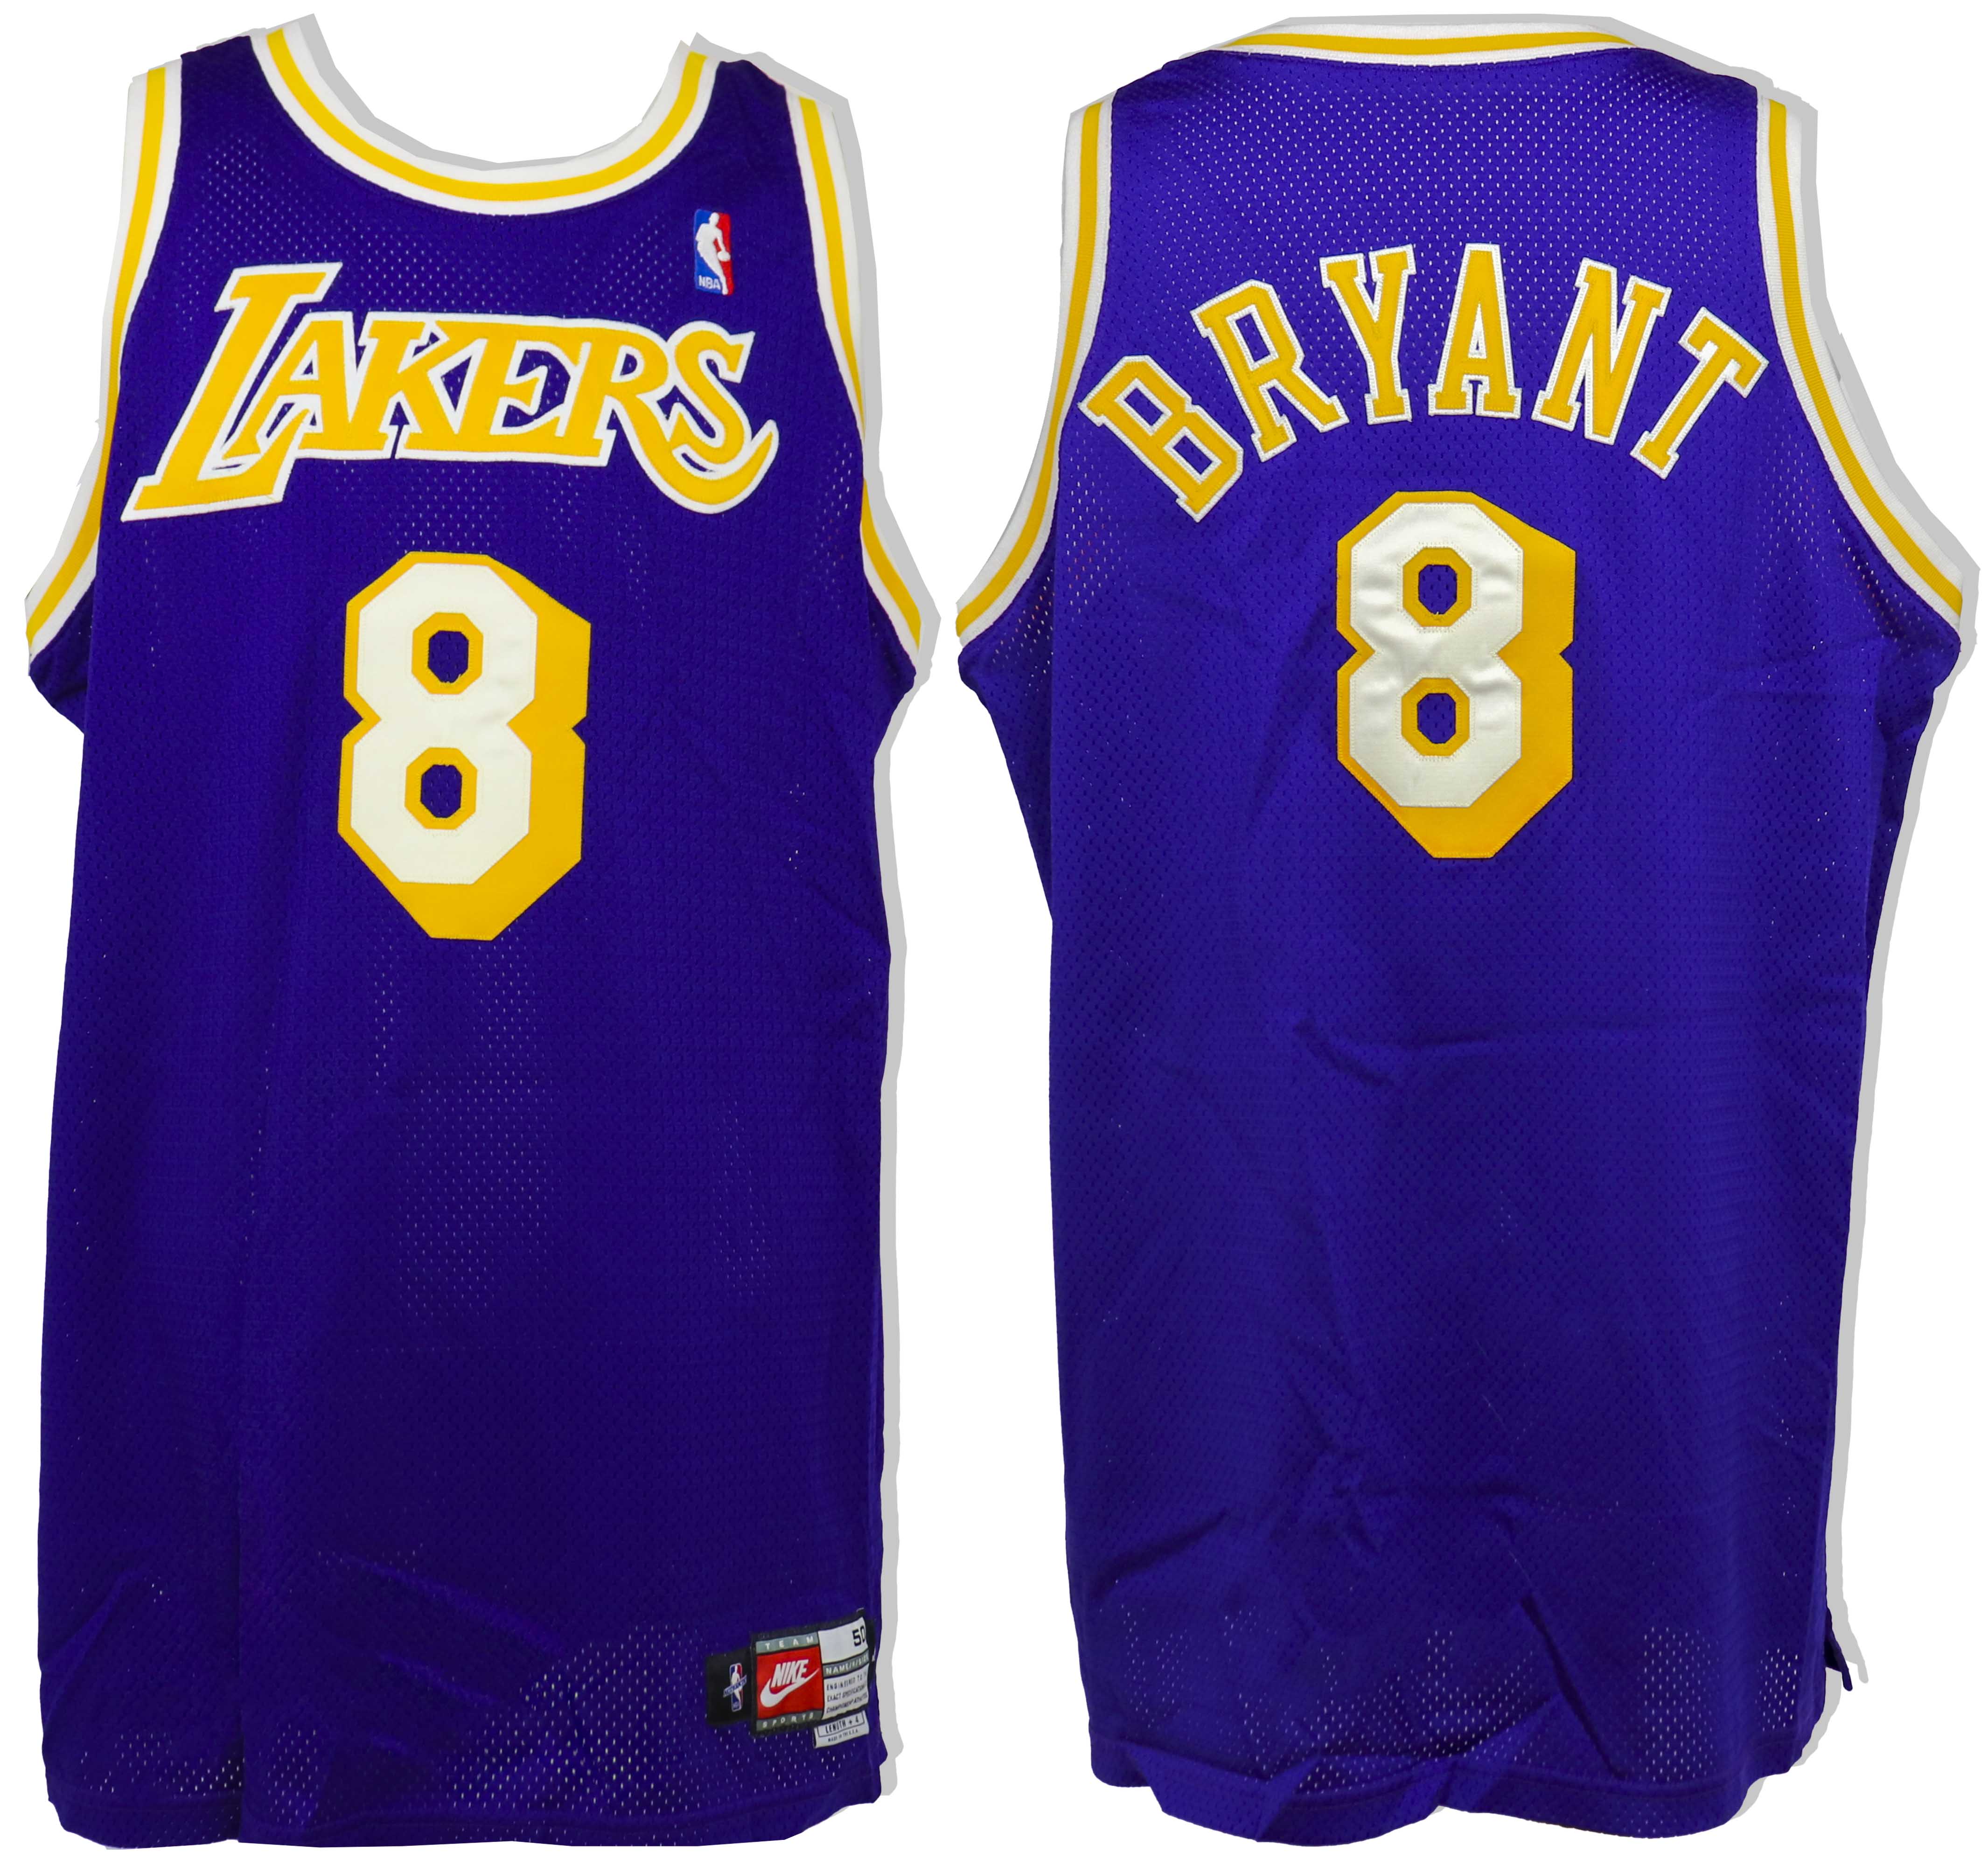 lakers jersey 1998